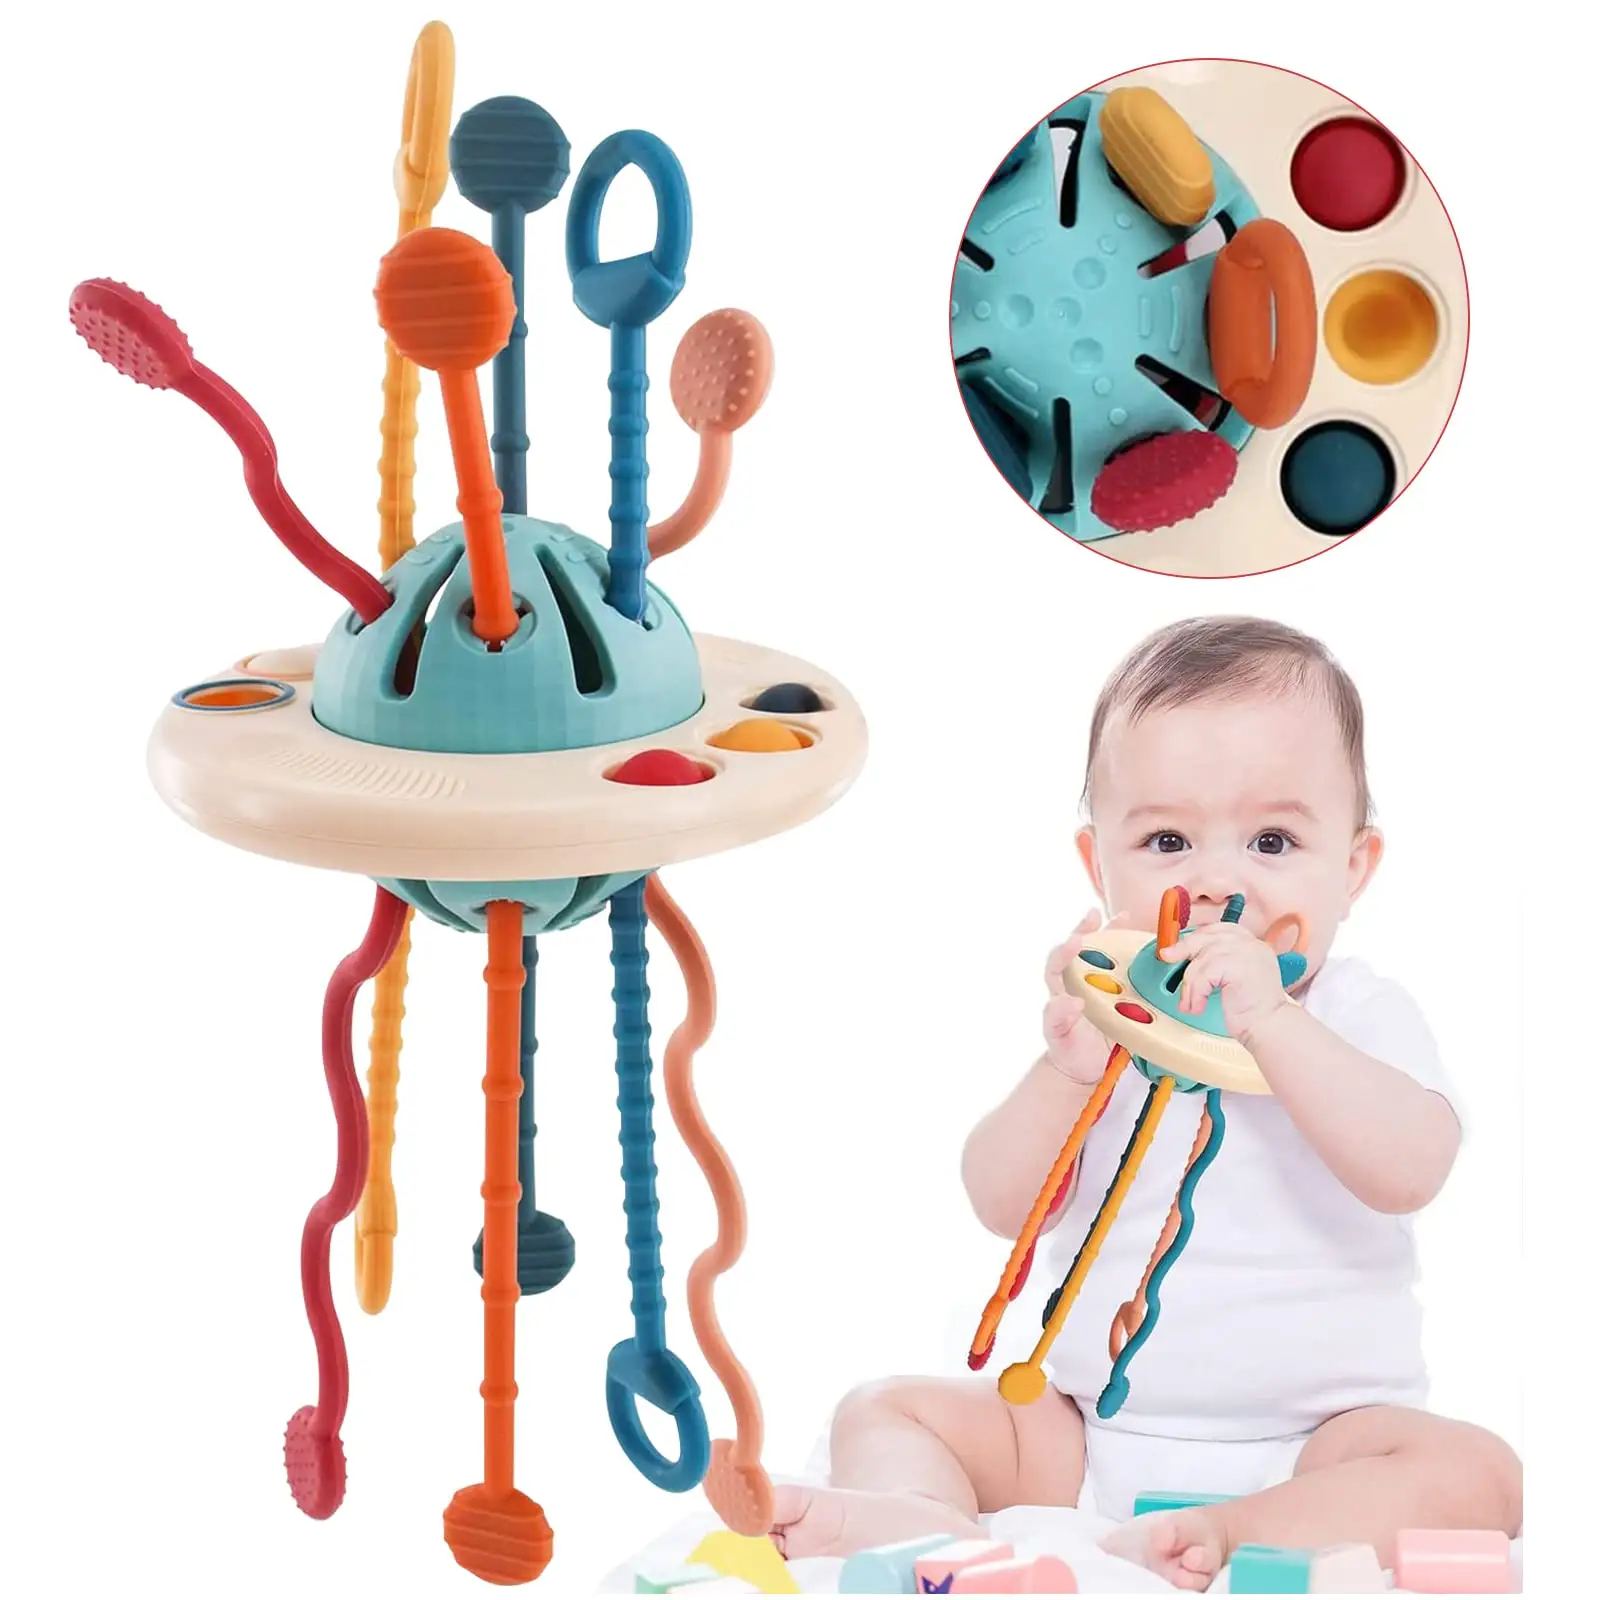 Popular Early Childhood Education Children's Safety Soft rubber rattle teether Toys Baby Hand Grab Ball Finger Grab Game